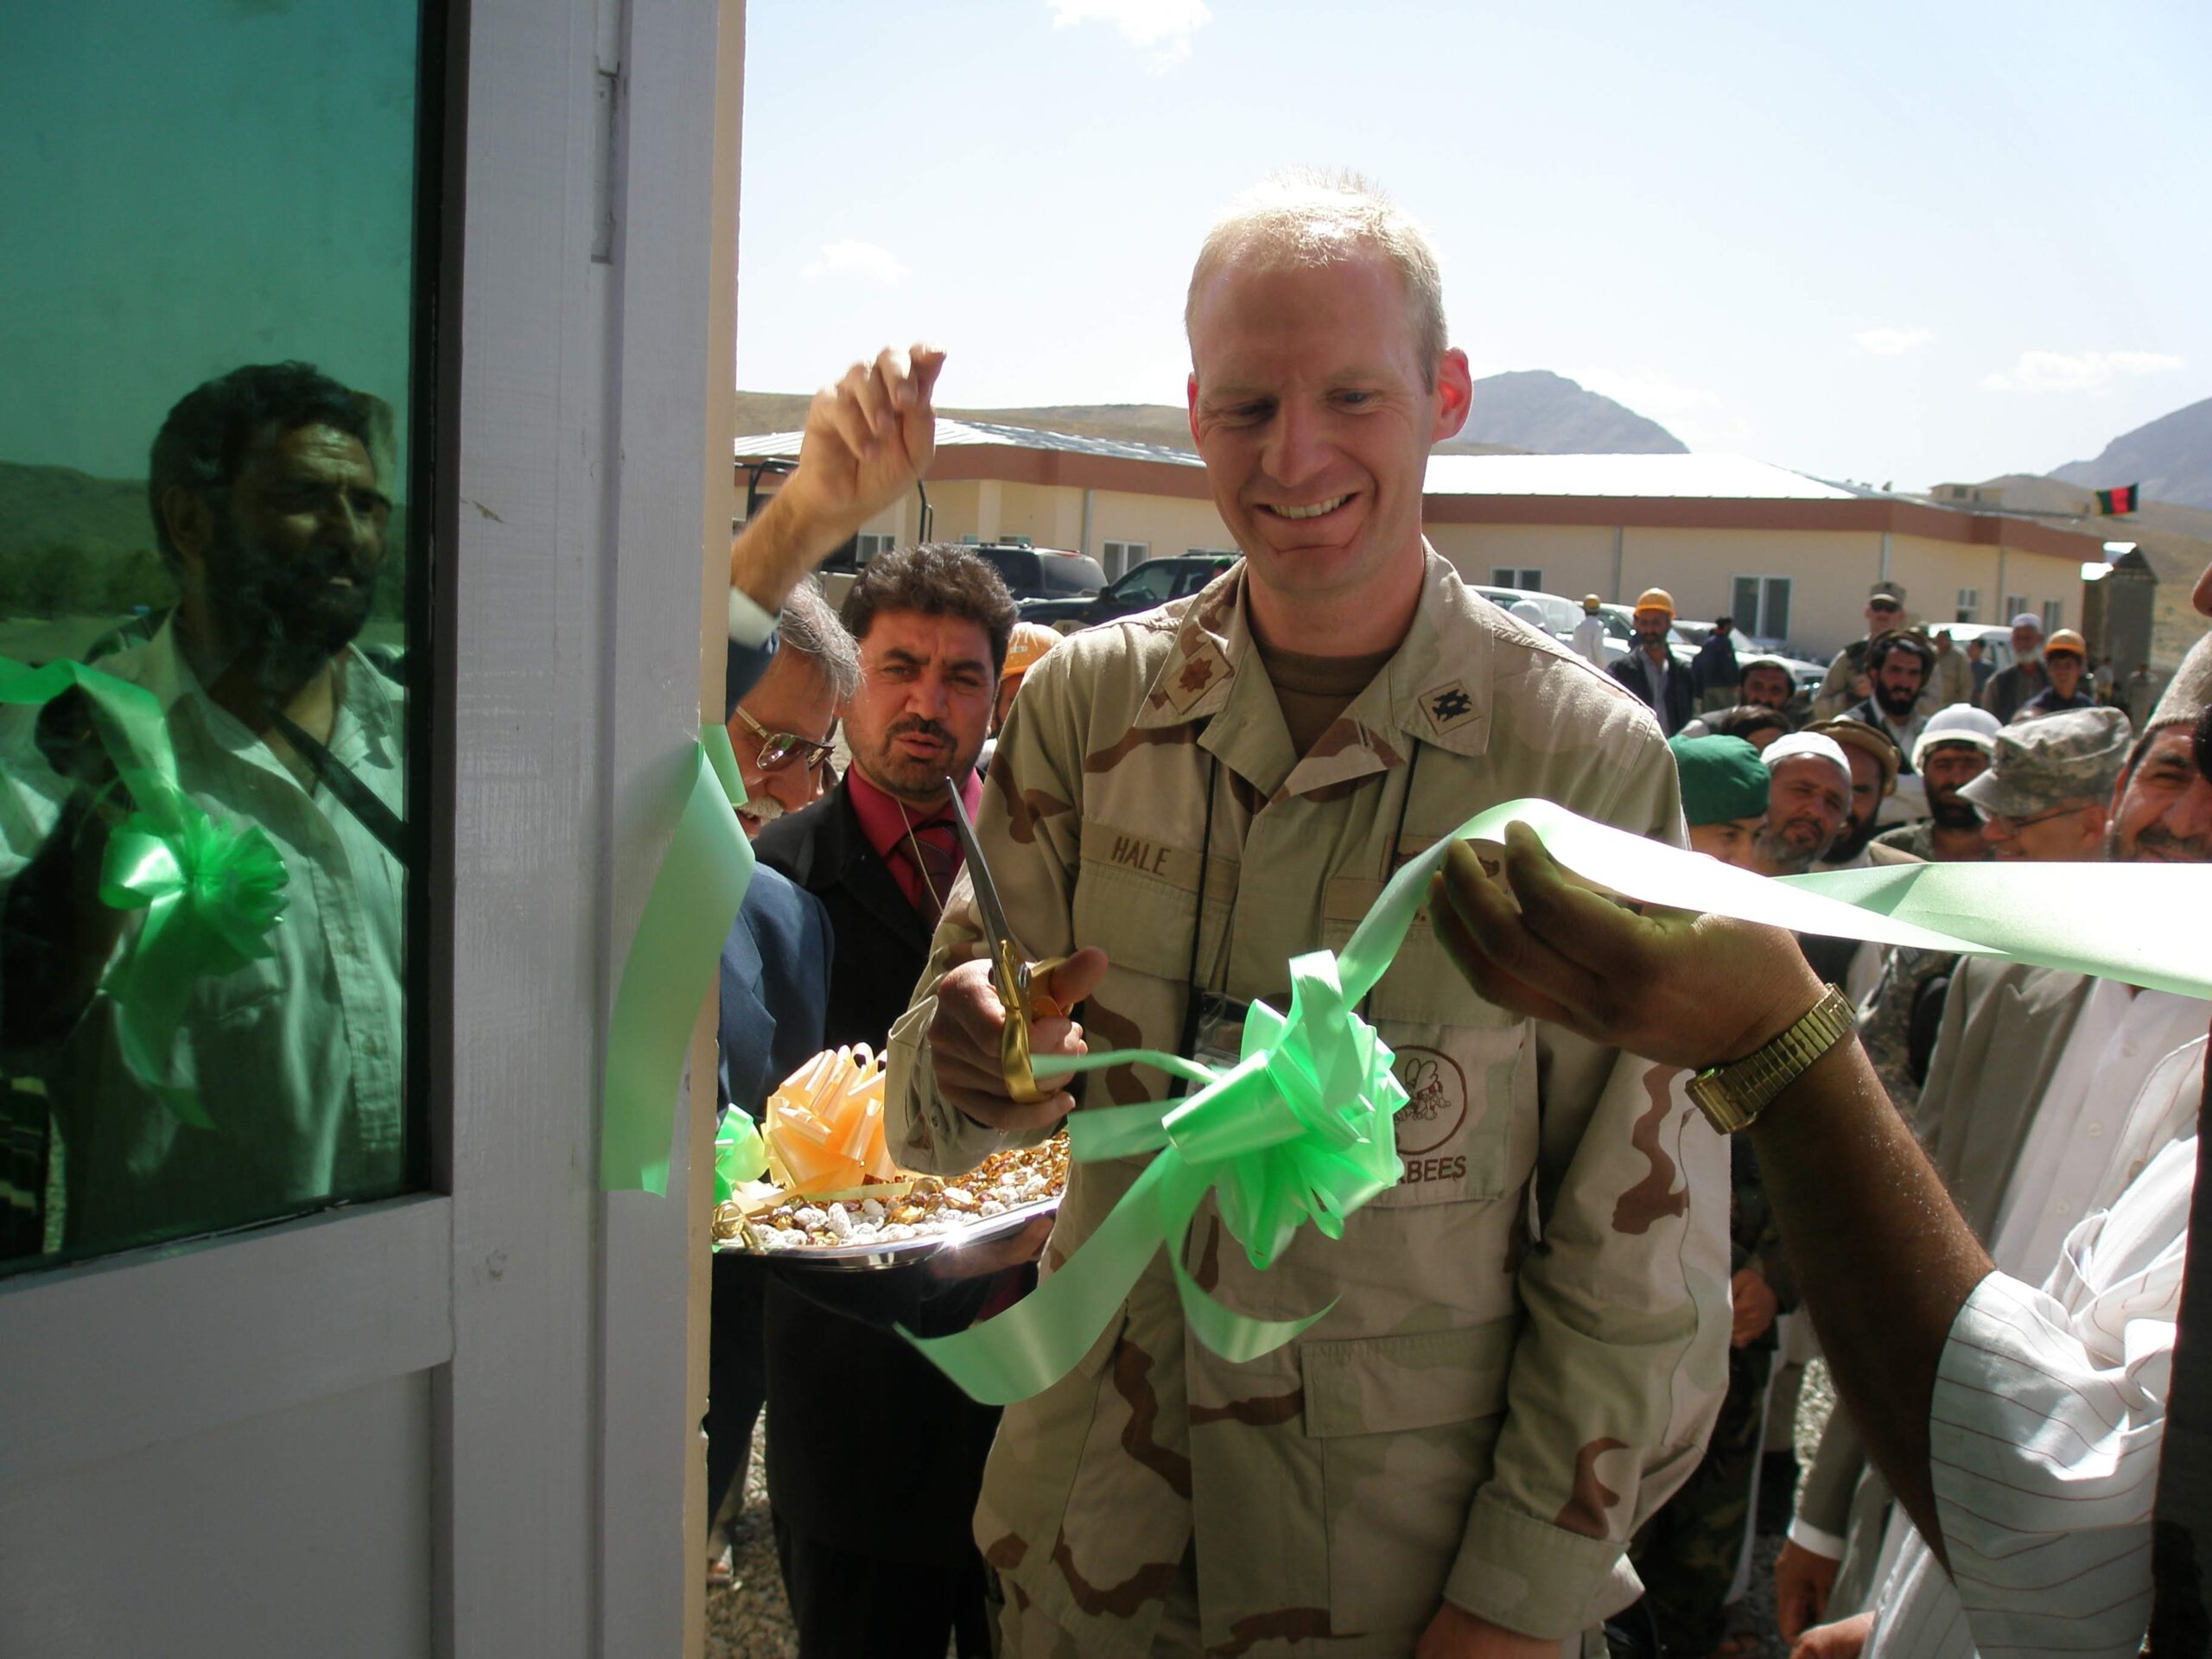 Darren Hale at a ribbon-cutting event in Afghanistan, where he worked on a project to build a training area for the afghan National Army’s Commando unit in 2007. During his six-month deployment, he mentored the Afghan National Arm on how to oversee construction of military facilities. 